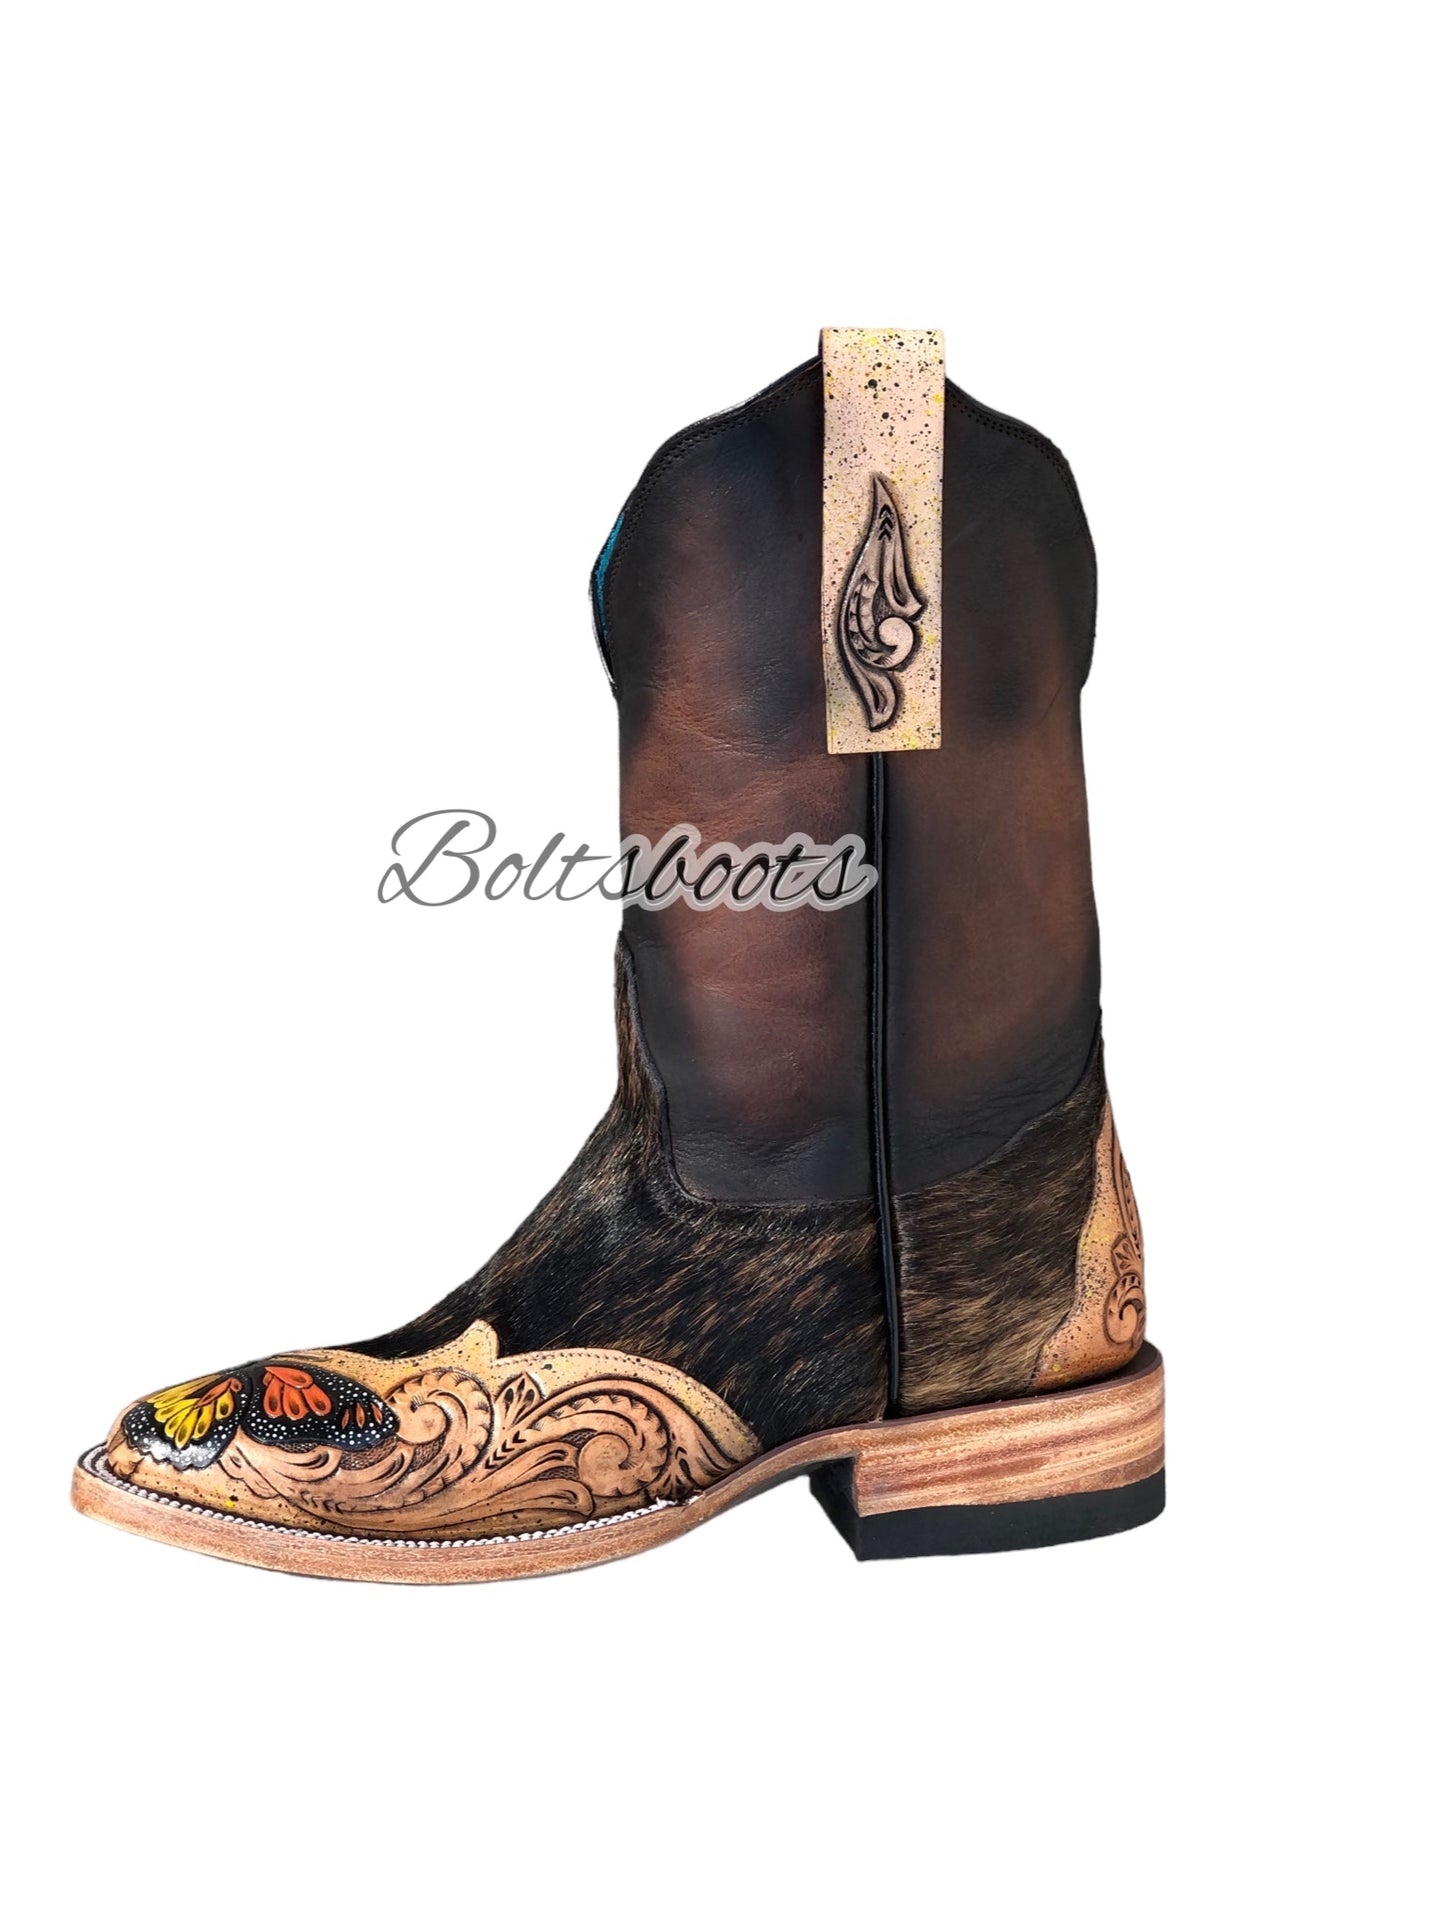 Monarch handtooled by Boltsbootsbrand